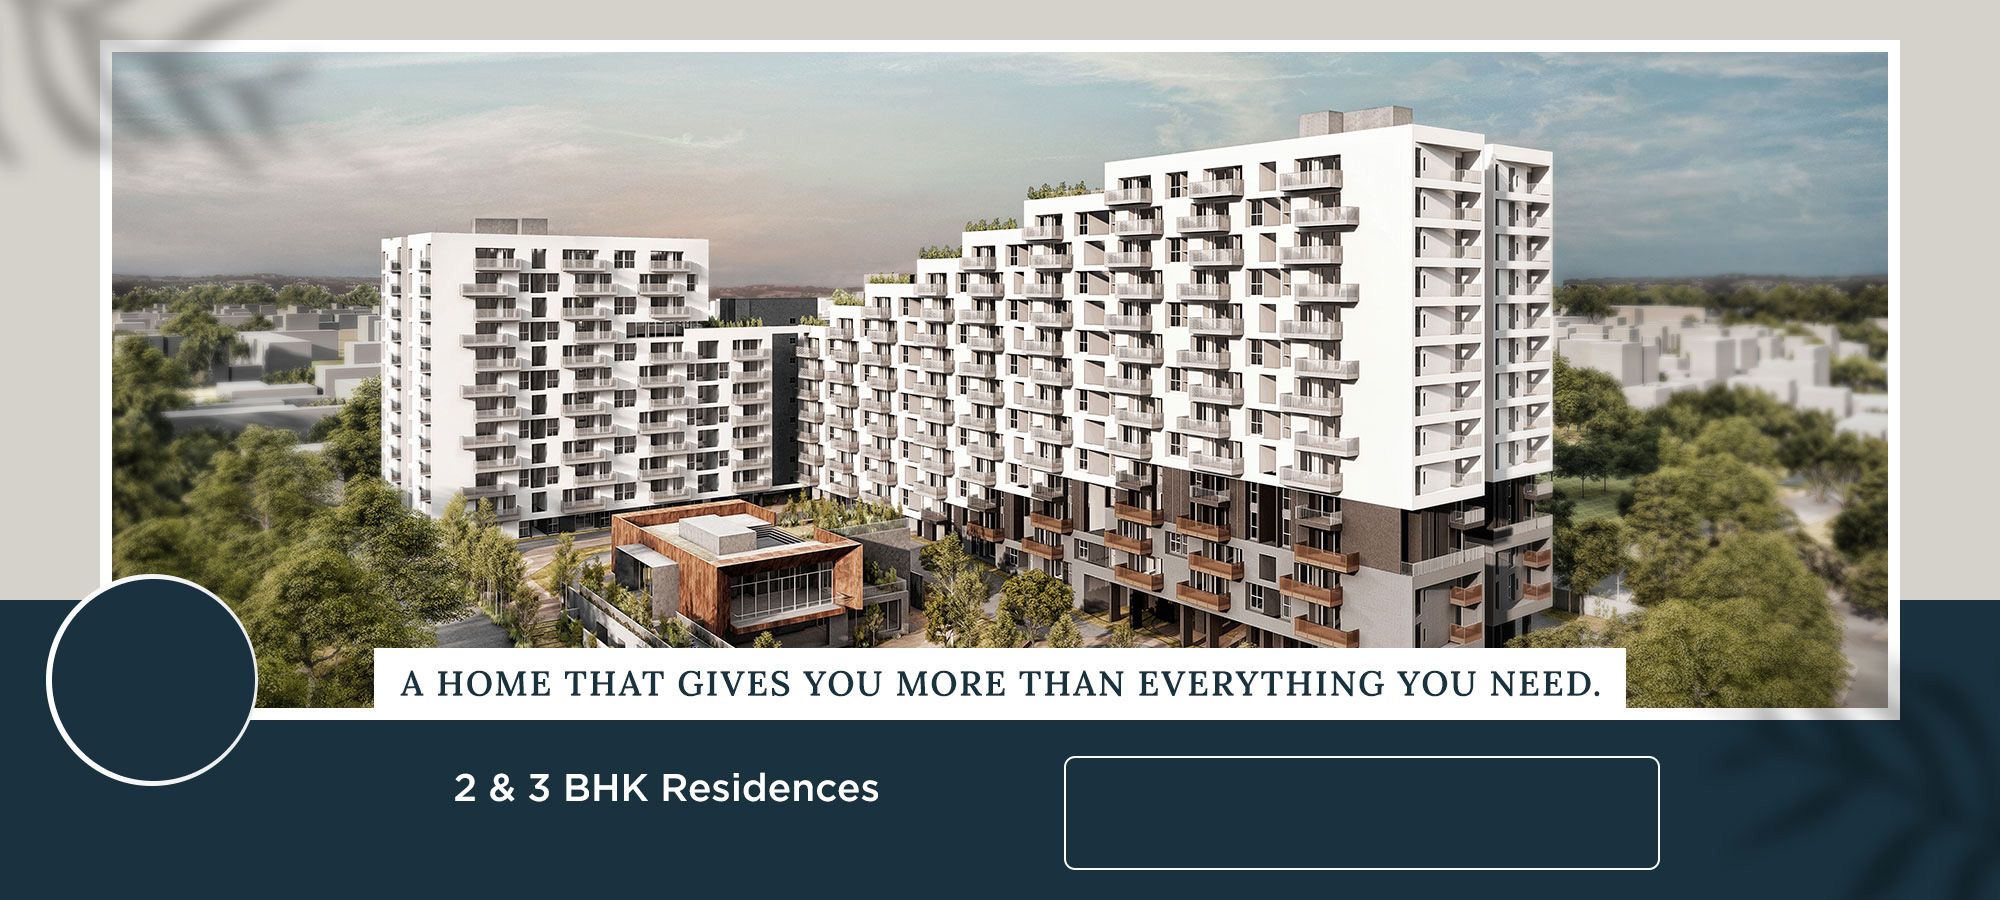 Newly
Launched
A HOME THAT GIVES YOU MORE THAN EVERYTHING YOU NEED.
2 & 3 BHK Residences
Starting 90 Lakh* | Off KR Puram
PAY JUST 5% TO BOOK A HOME &
NOTHING ELSE FOR 3 YEARS